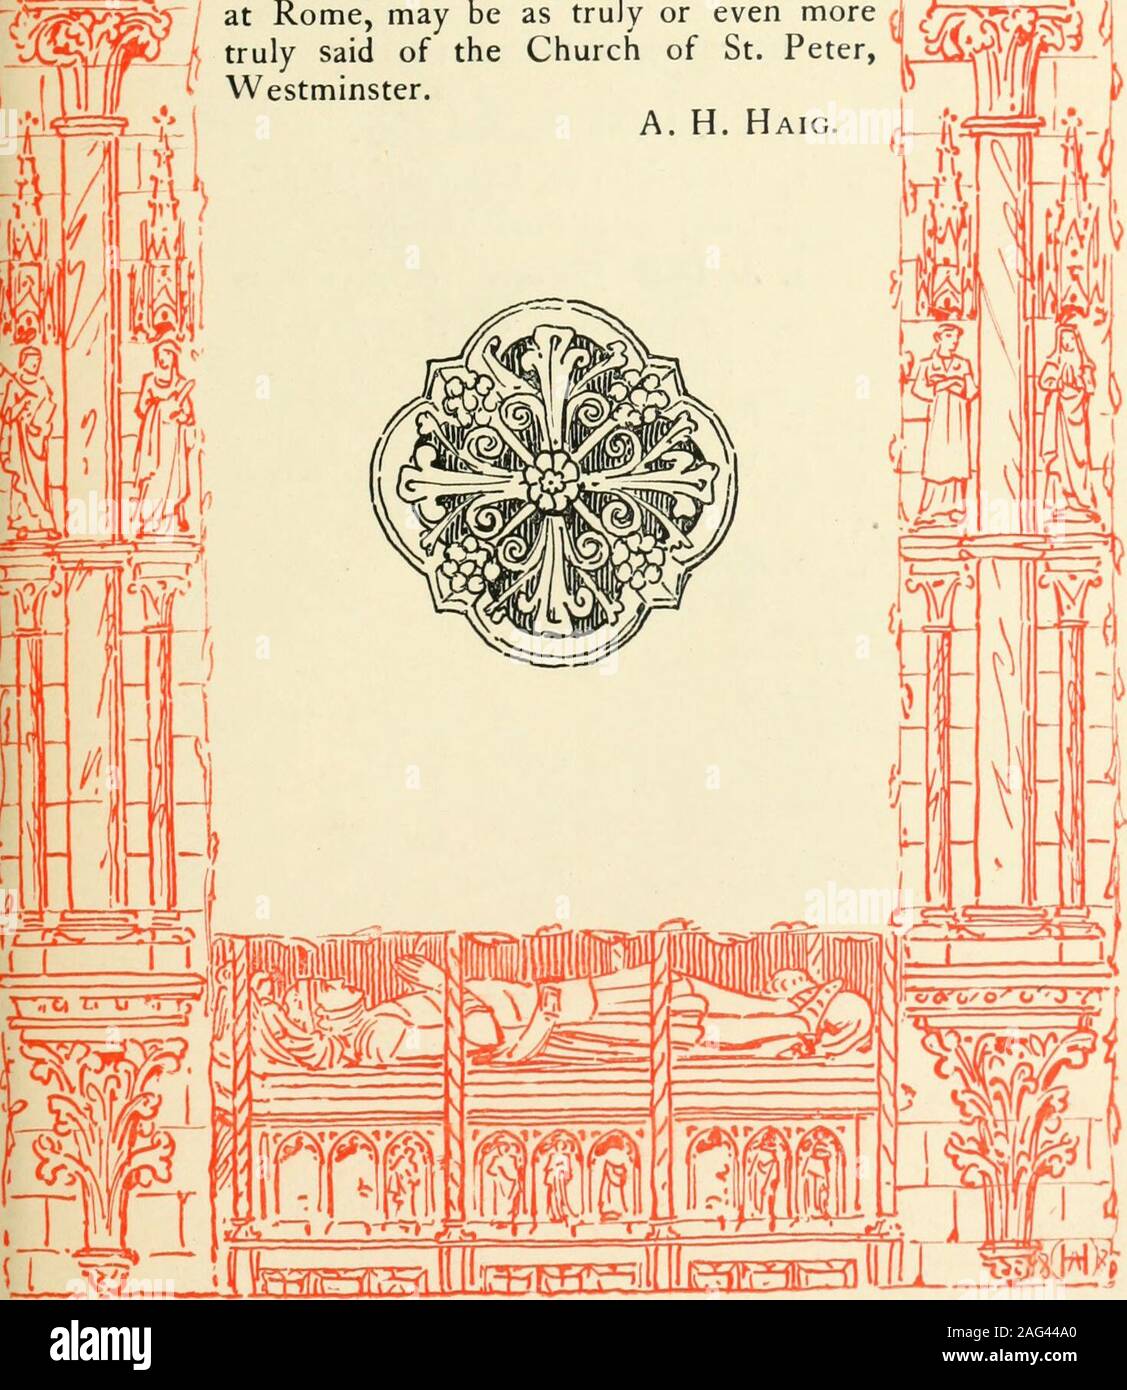 . Impressions of Westminster abbey, an illustrated text to accompany seven etchings. But thou, of temples old, or altars new,Standest alone—with nothing like to thee—Worthiest of God, the holy and the true.Since Zions desolation, when that HeForsook His former city, what could be.Of earthly structures, in His honour piled,Of a sublimer aspect ? Majesty,Power, glory, strength, and beauty, all are aisledIn this eternal ark of worship undefiled. ^ tlZzS^^. And possibly a time will come when these ]^ T^^ *^^^yS^ i.ny y (i words, applied to St. Peters great church v^jtr t&gt;r^7^^^^ ; at Rome, may Stock Photo